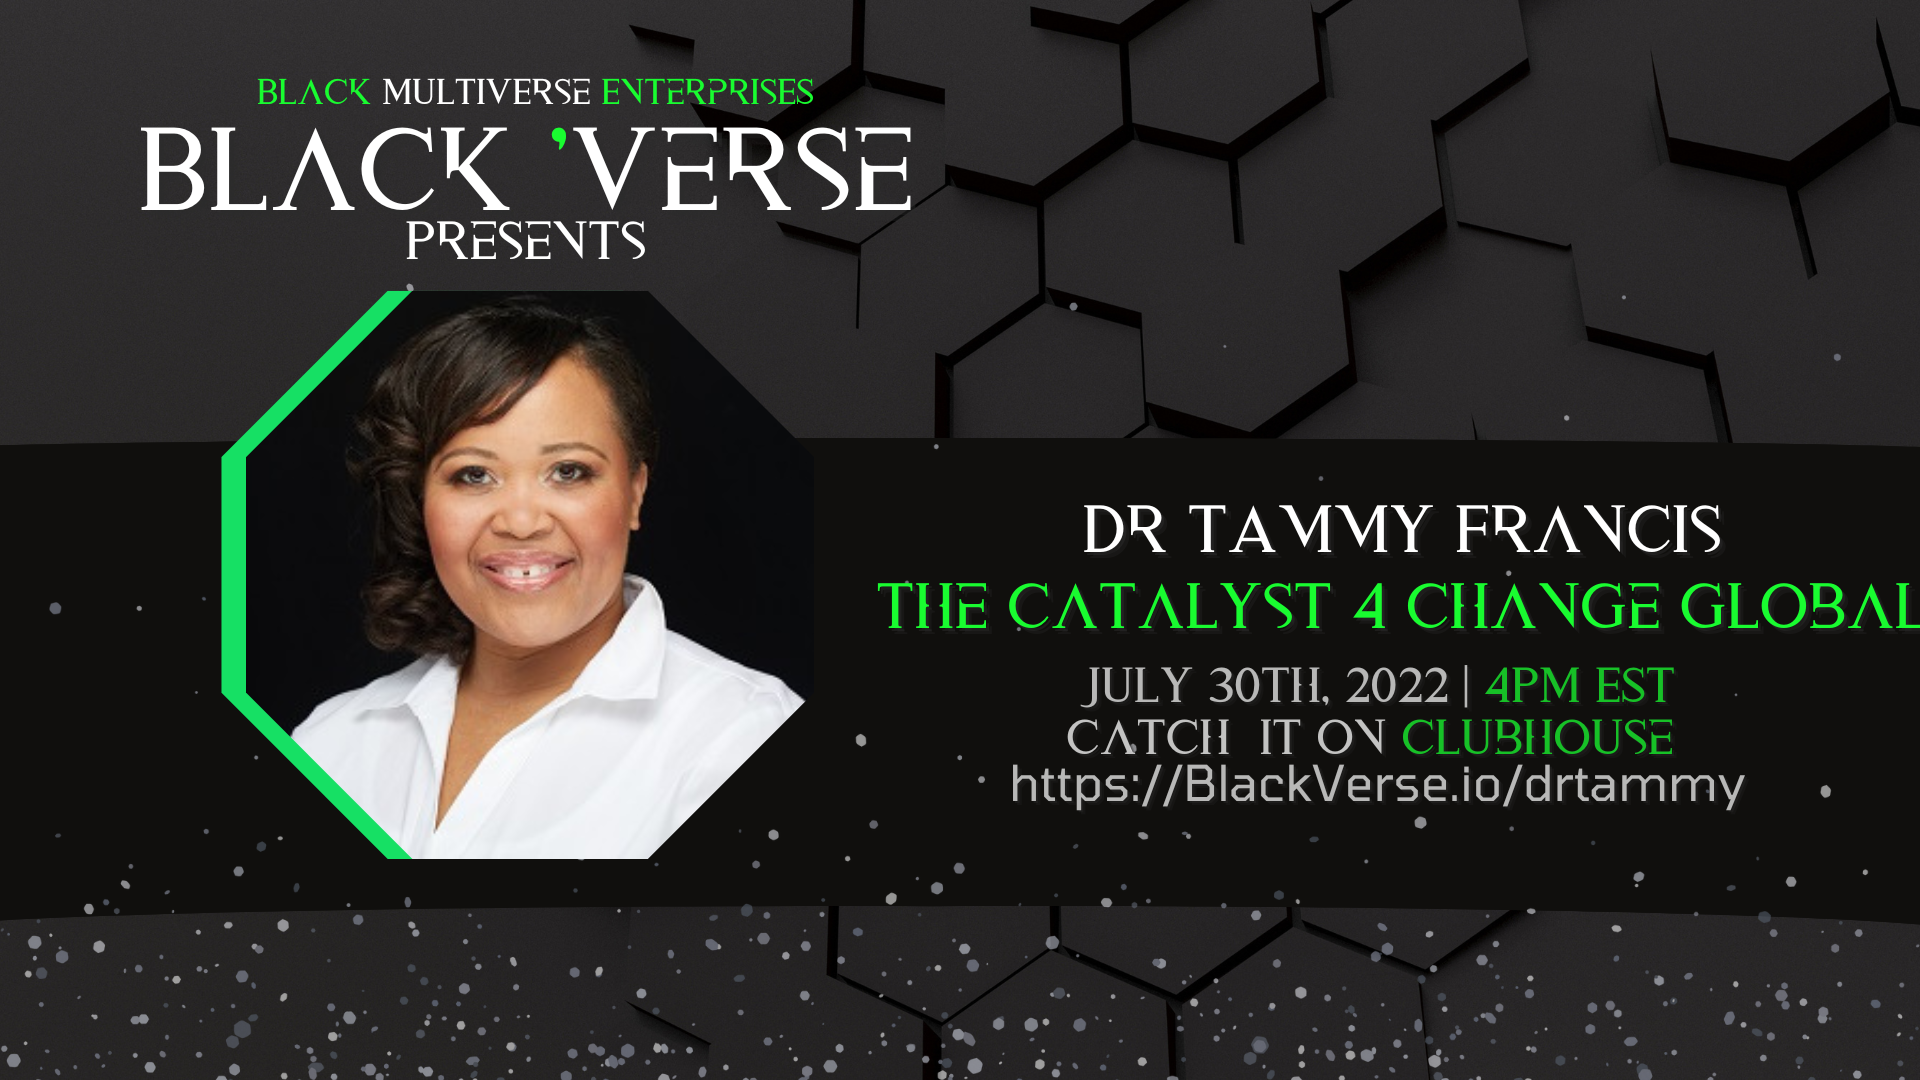 Black 'Verse Presents Dr Tammy Francis and the Catalyst 4 Change Global